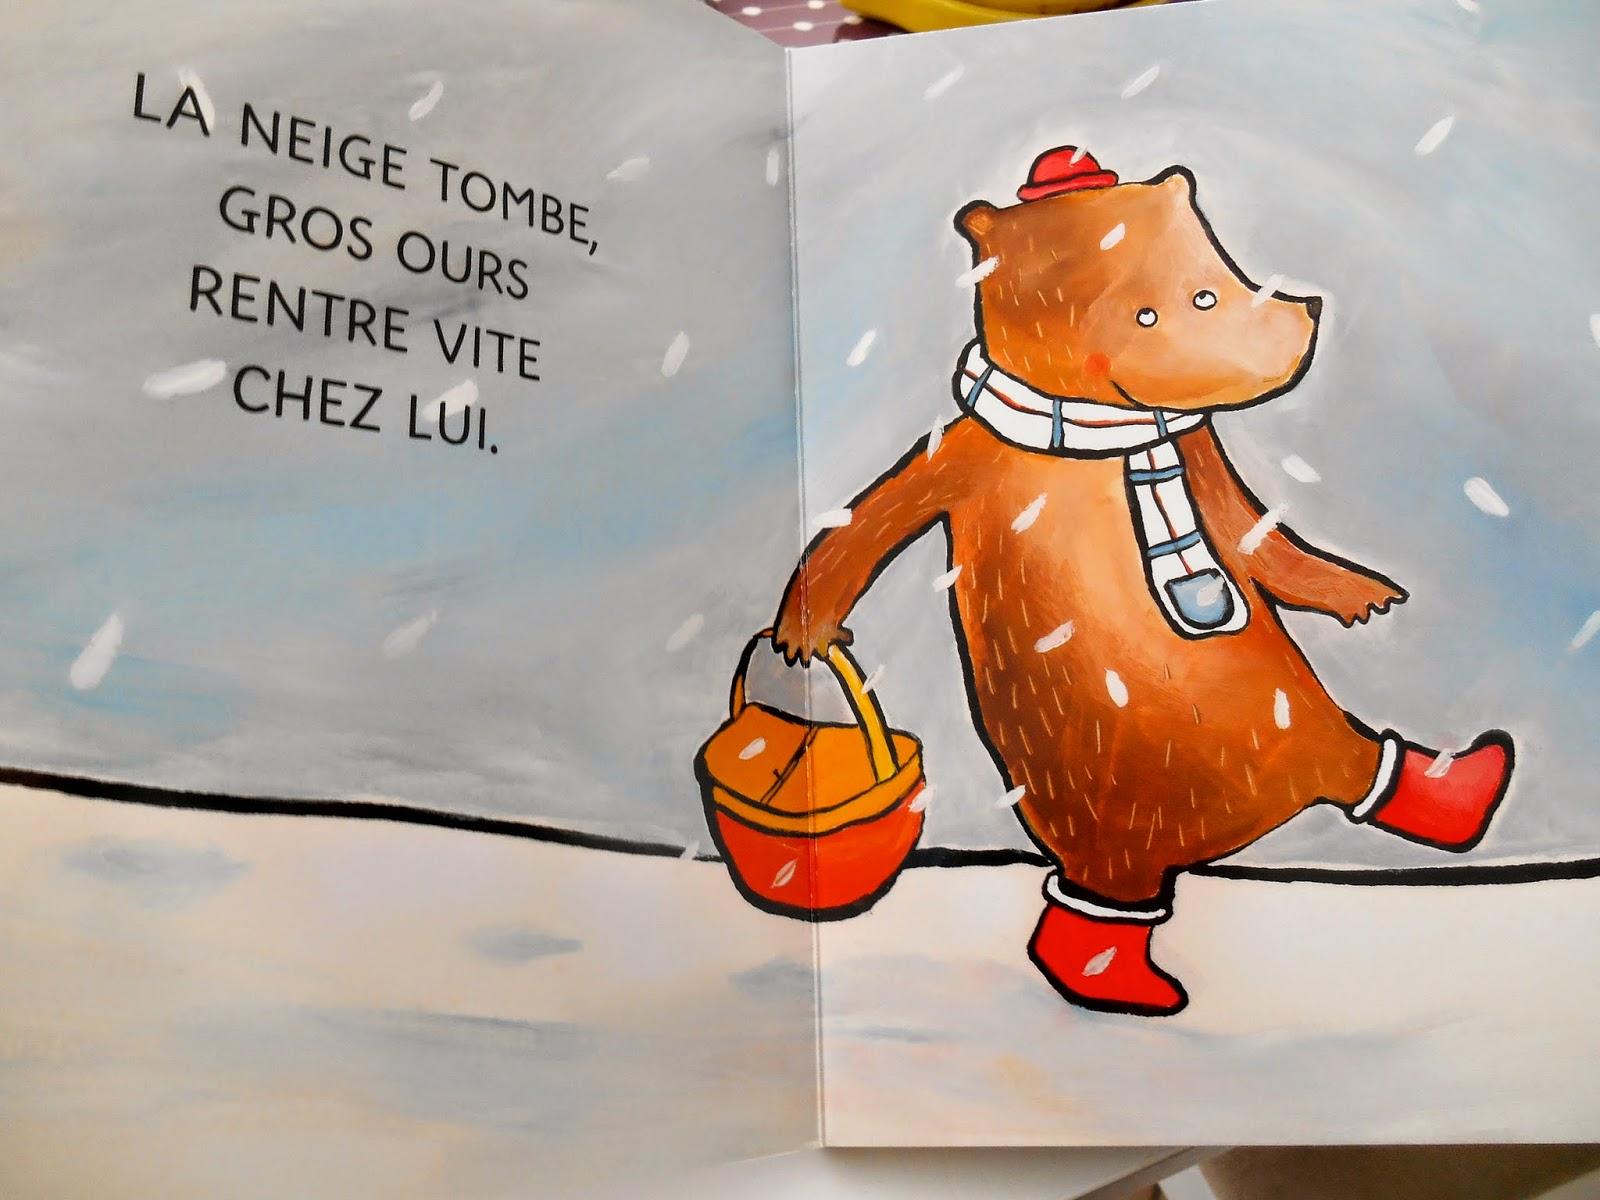 Gros ours, il fait froid ! ♥ ♥ ♥